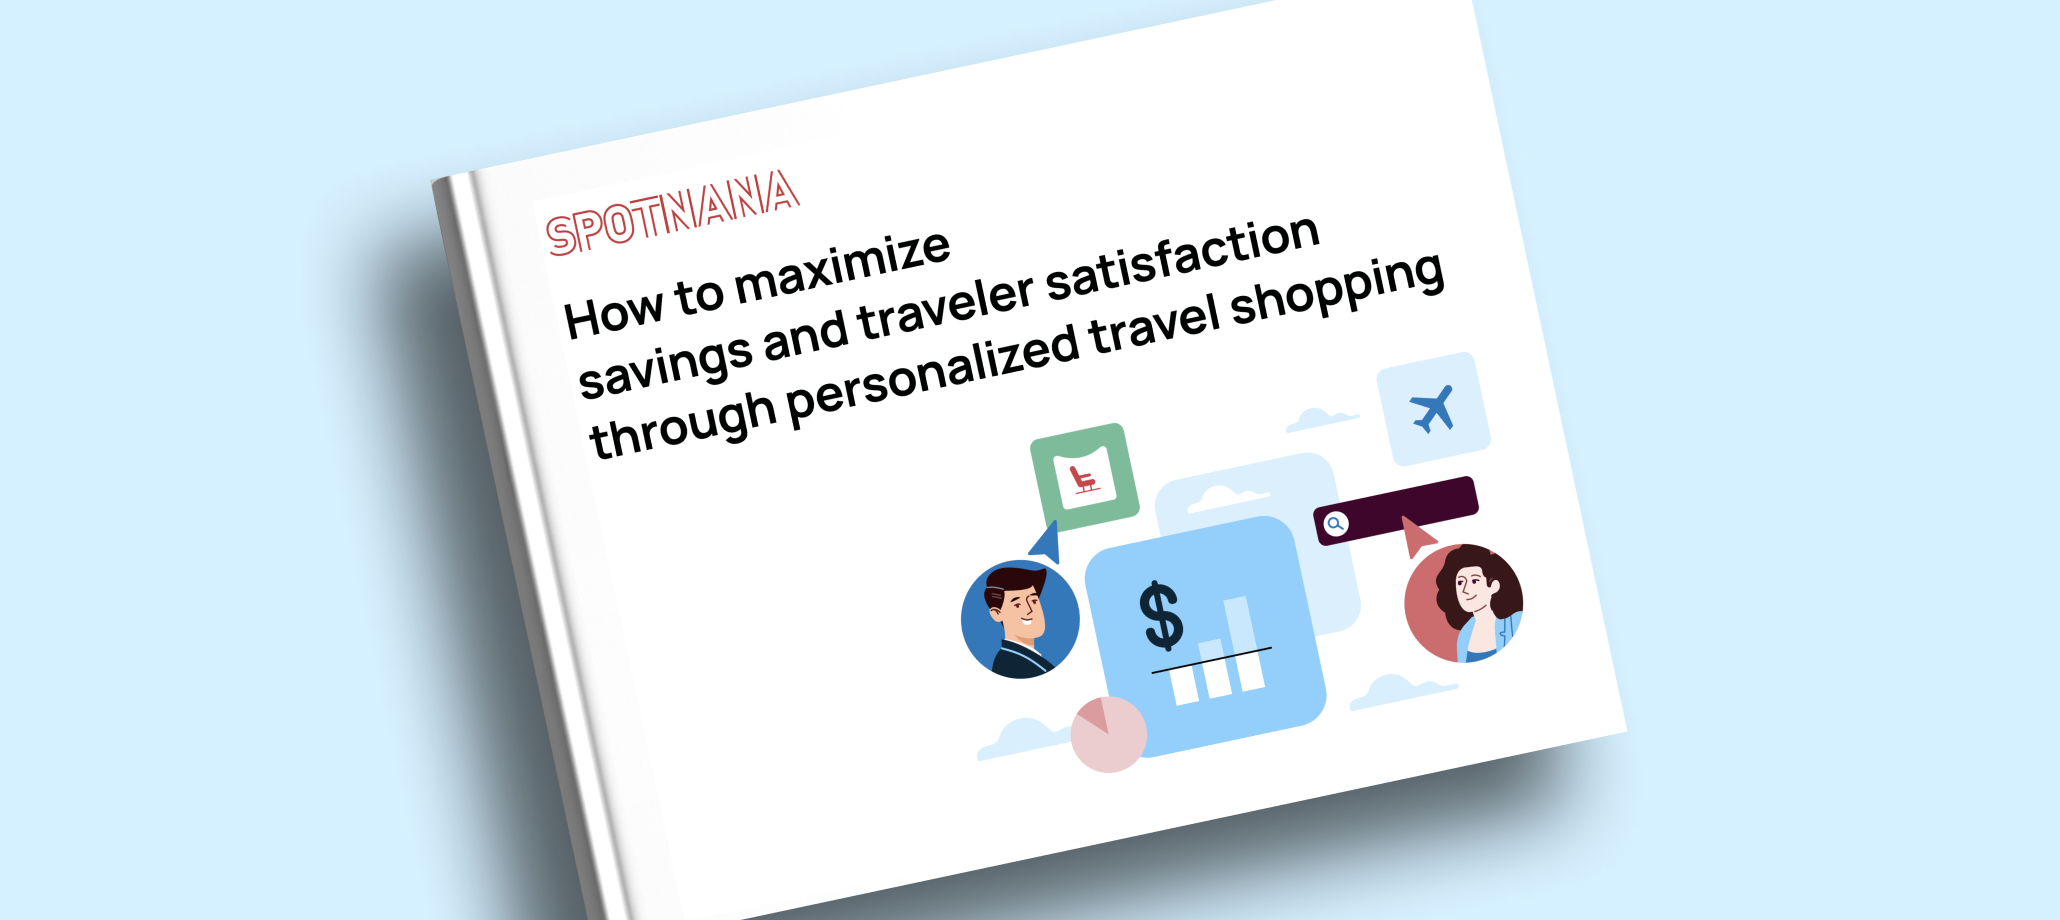 Spotnana ebook of how to maximize savings and traveler satisfaction through personalized travel shopping